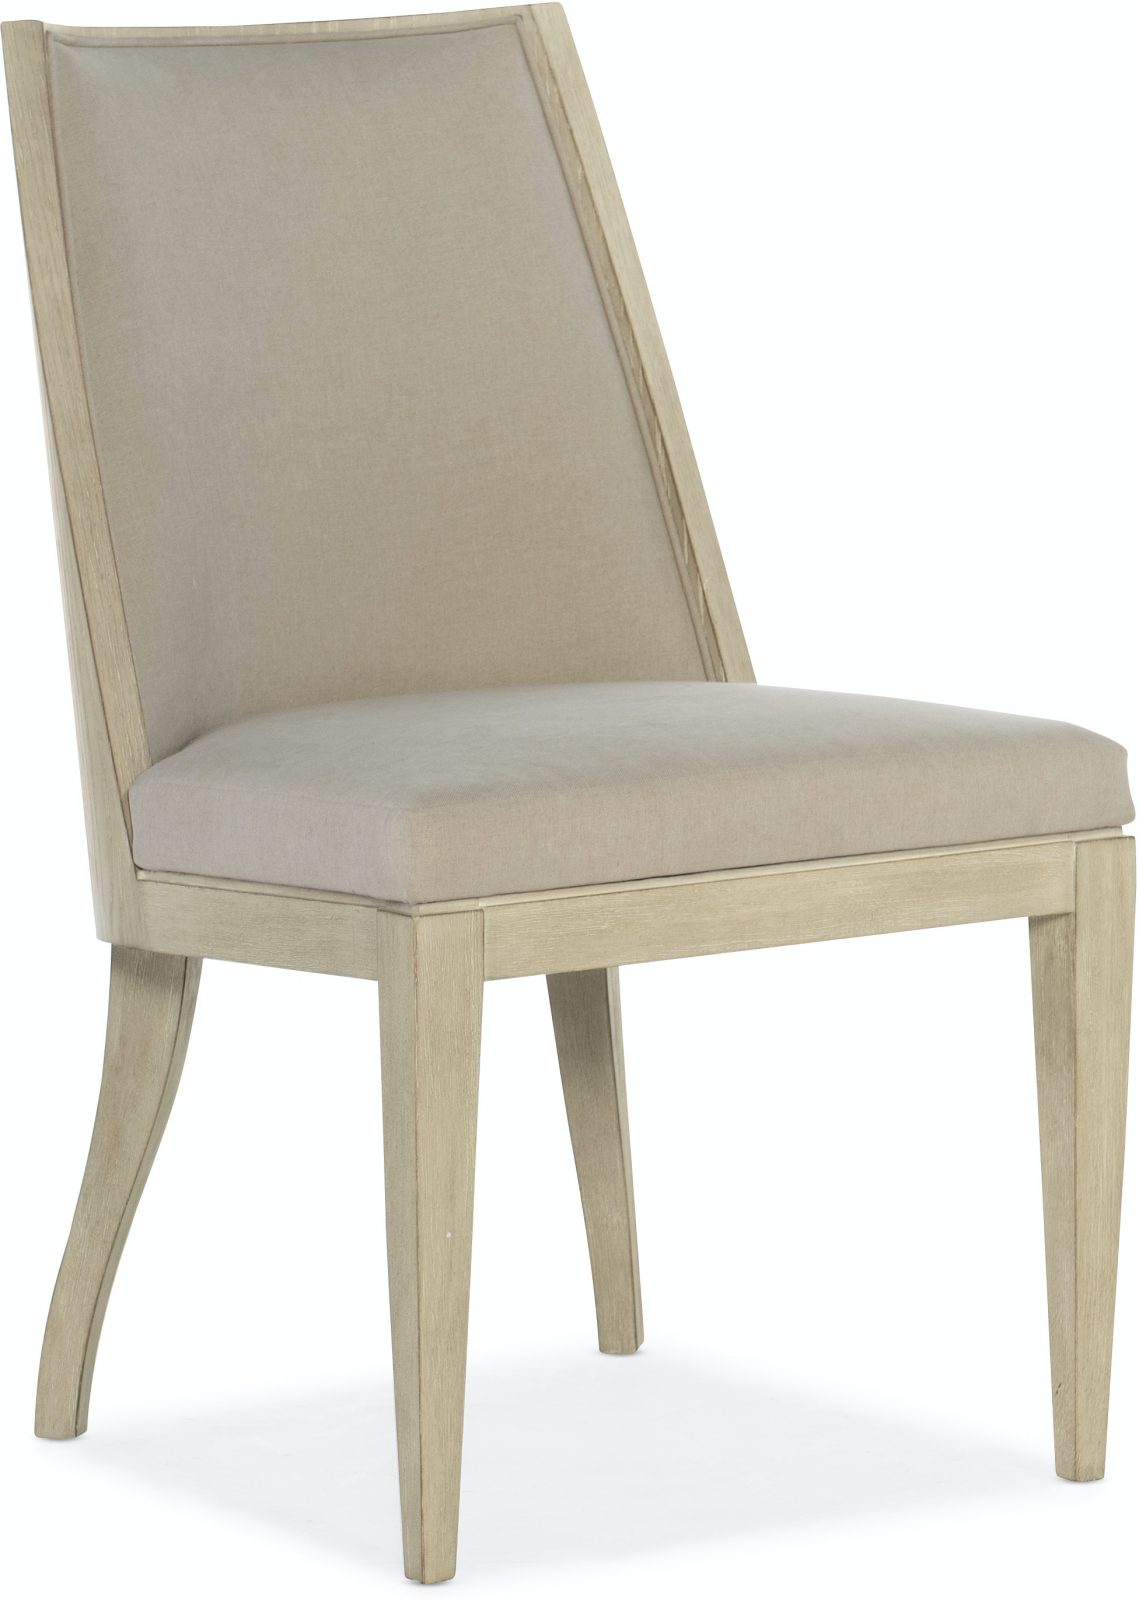 Cascade Upholstered side chair